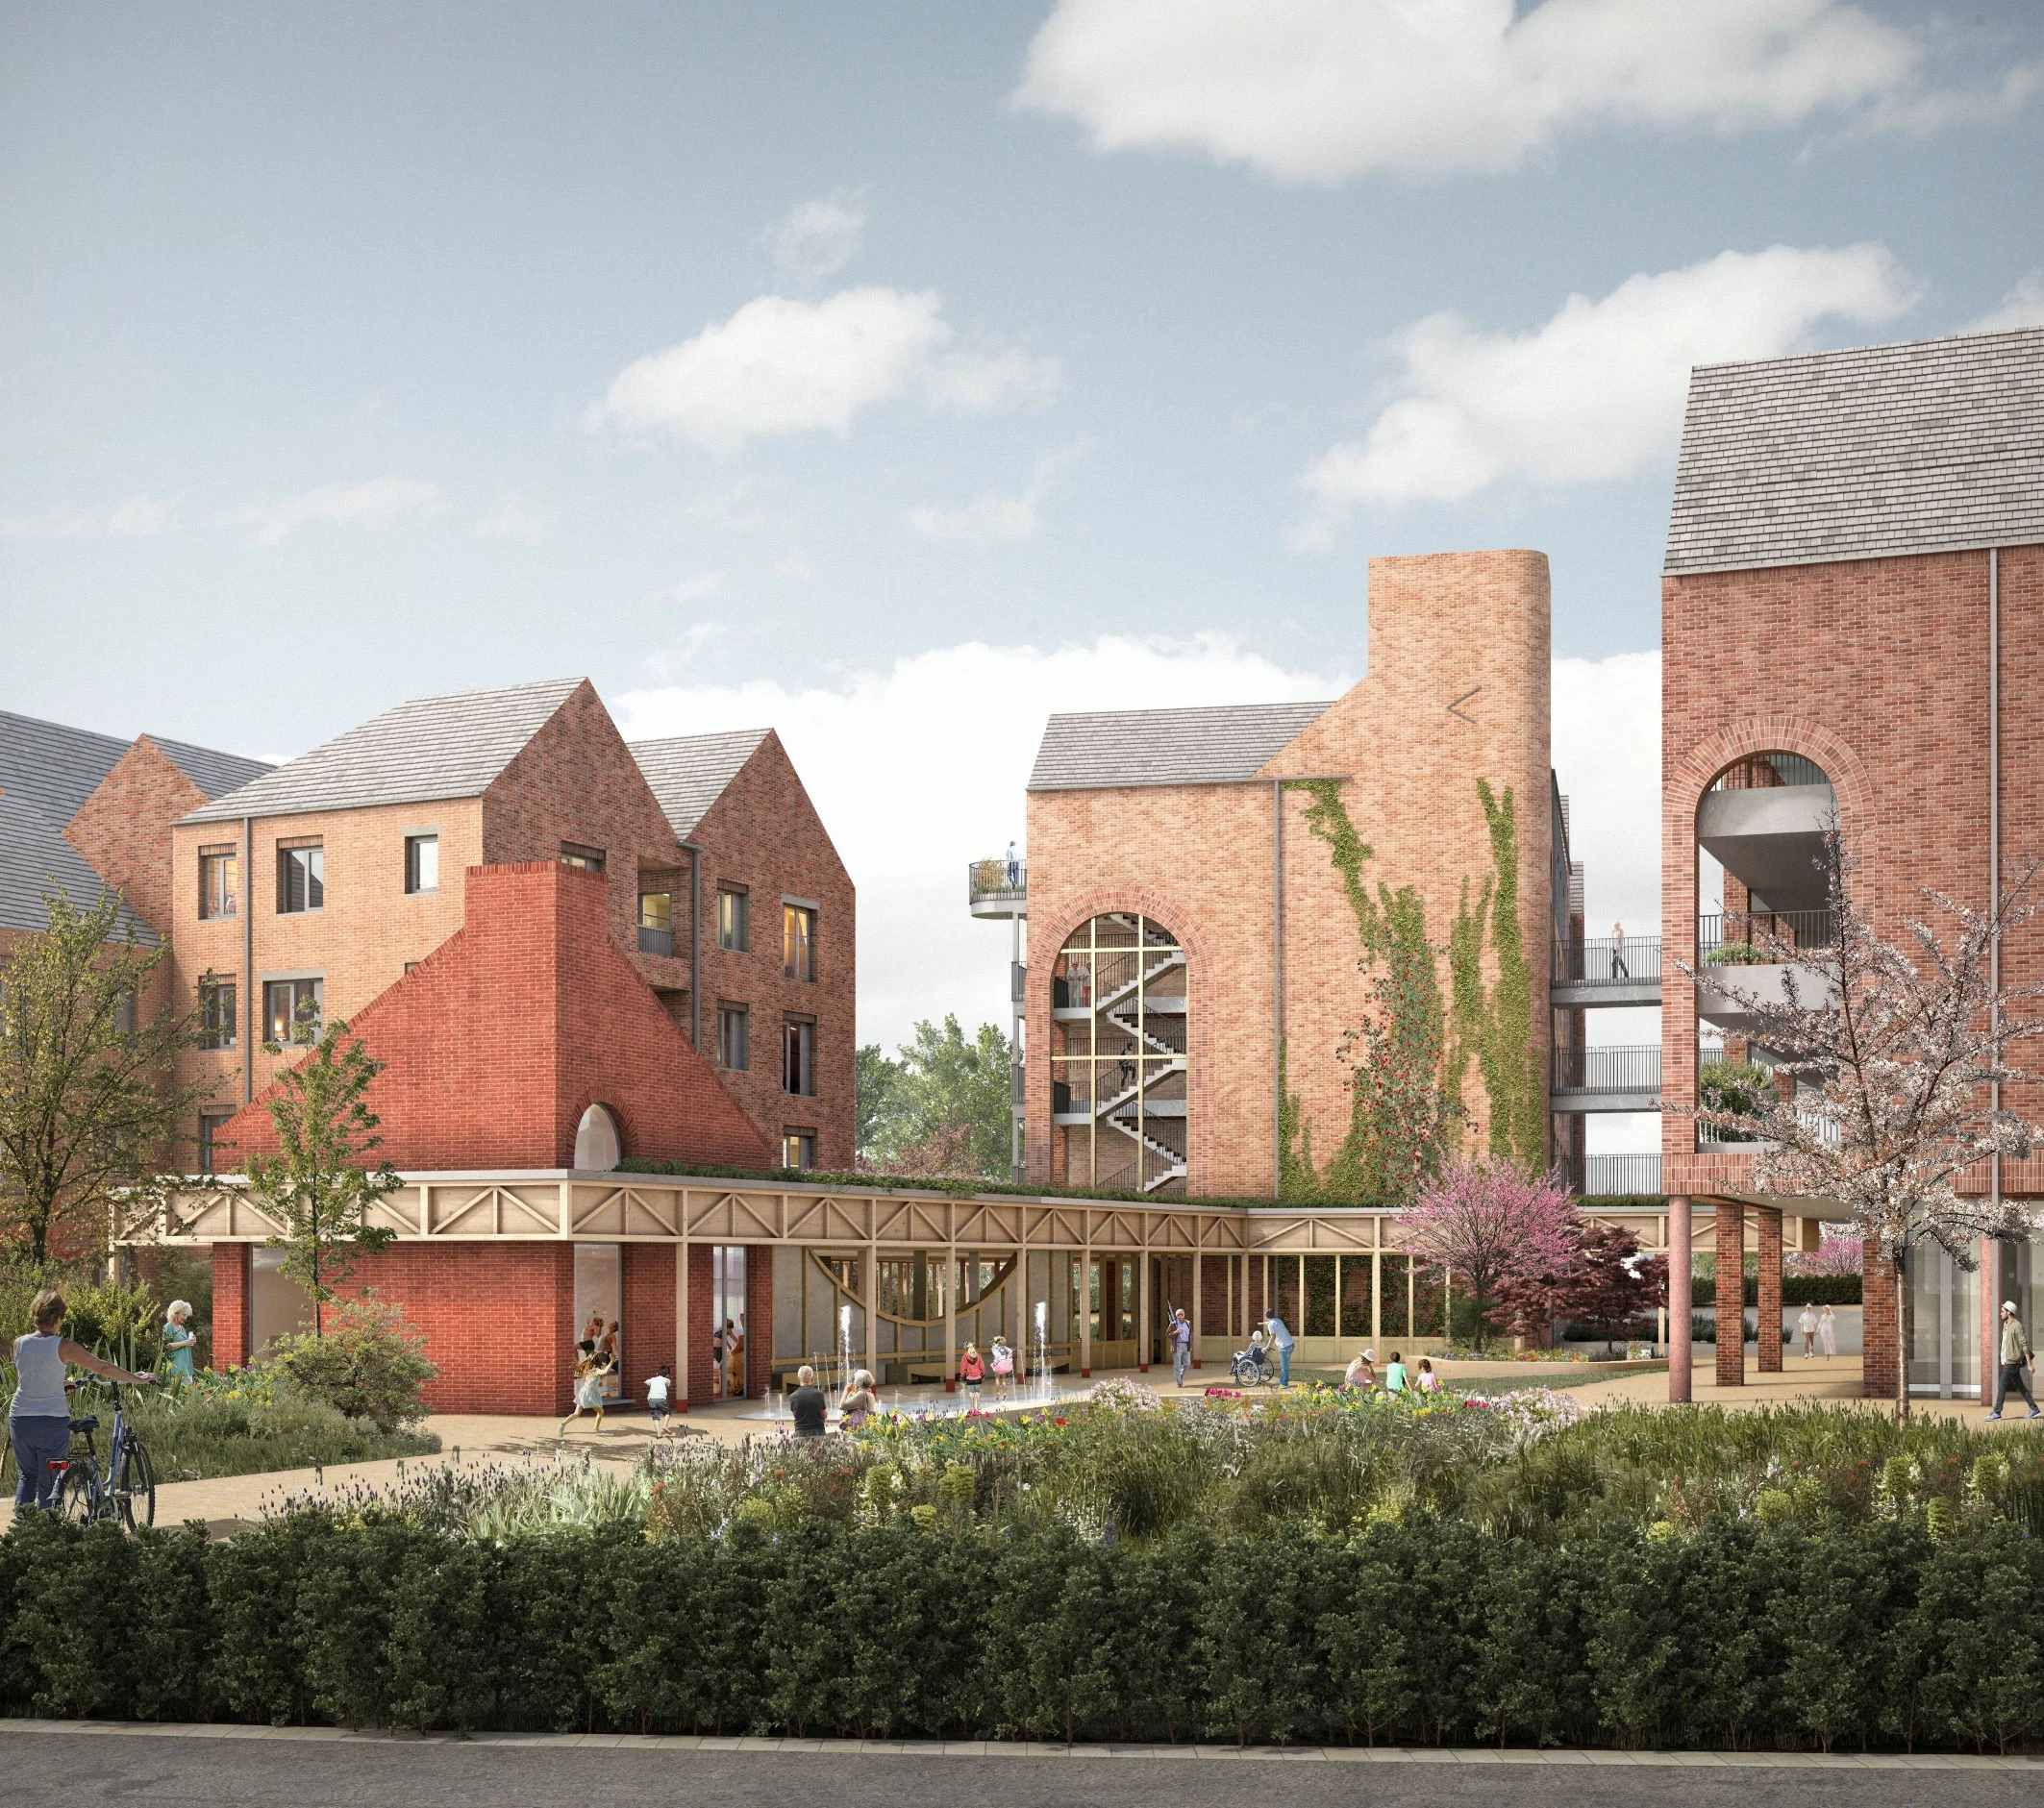 Picture shows a future development planned by the Retirement Villages Group, which has appointed Perfect Storm as its digital marketing agency